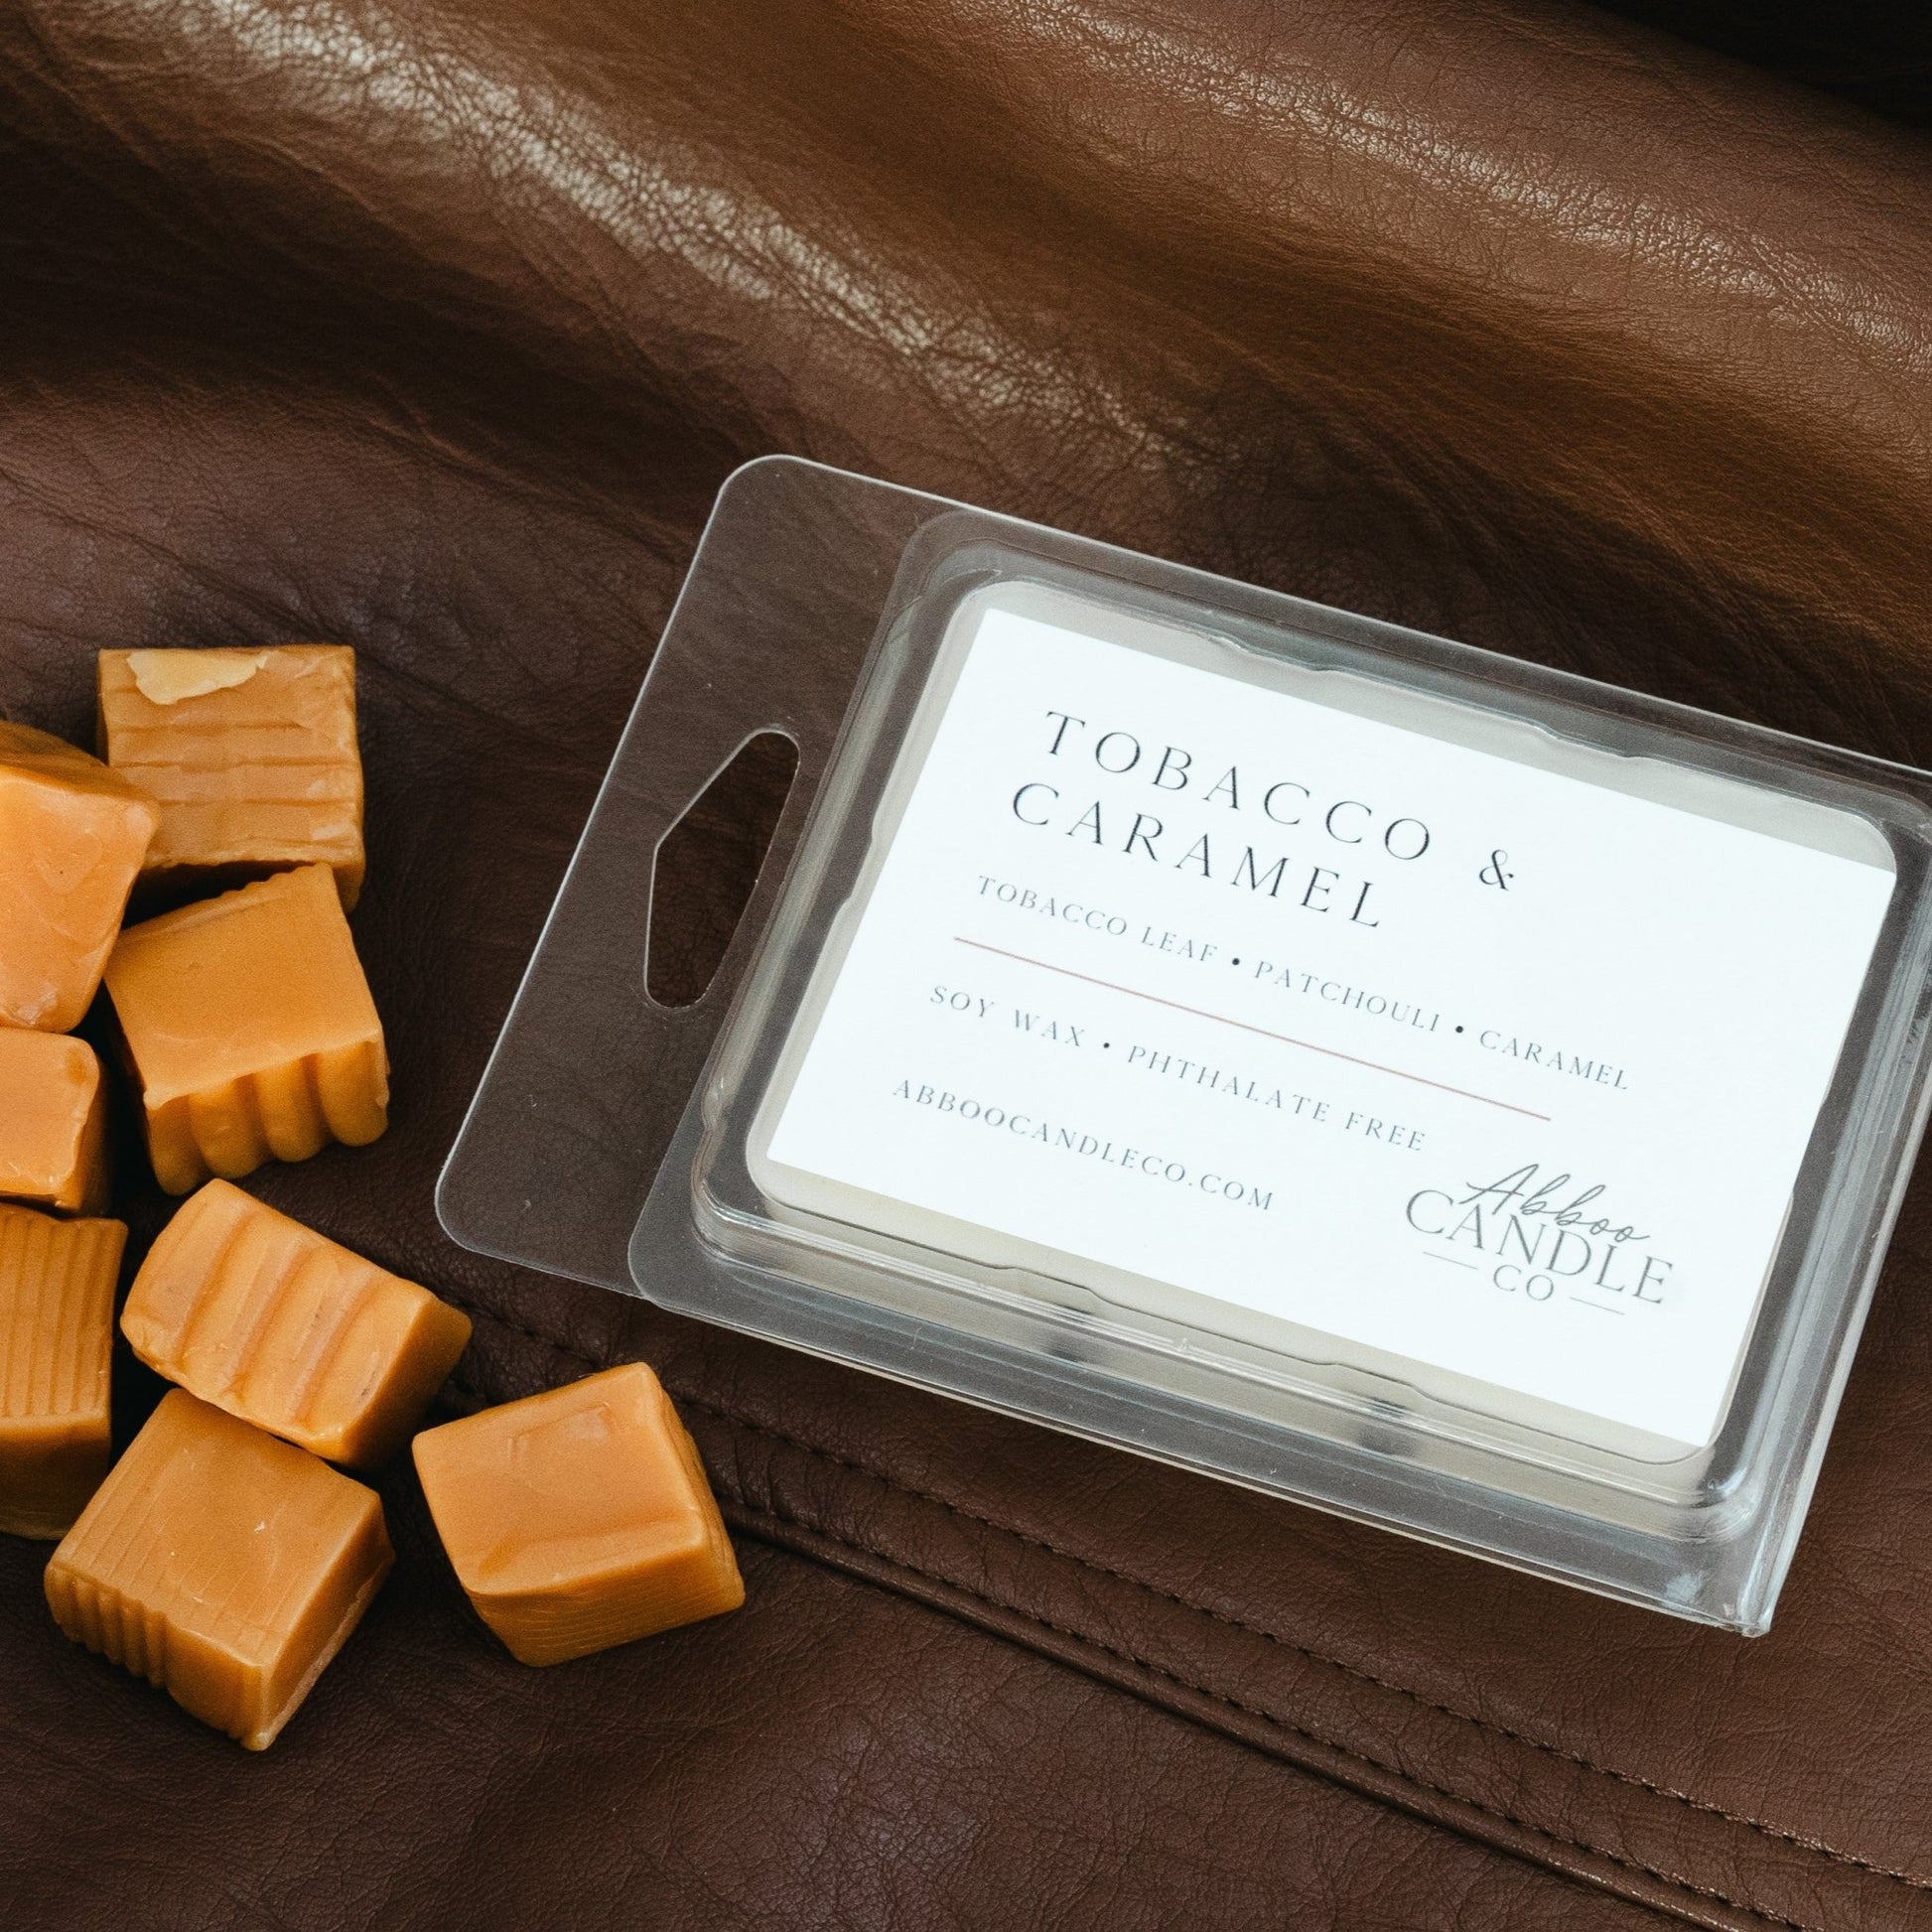 Tobacco and Caramel Soy Wax Melts - Abboo Candle Co